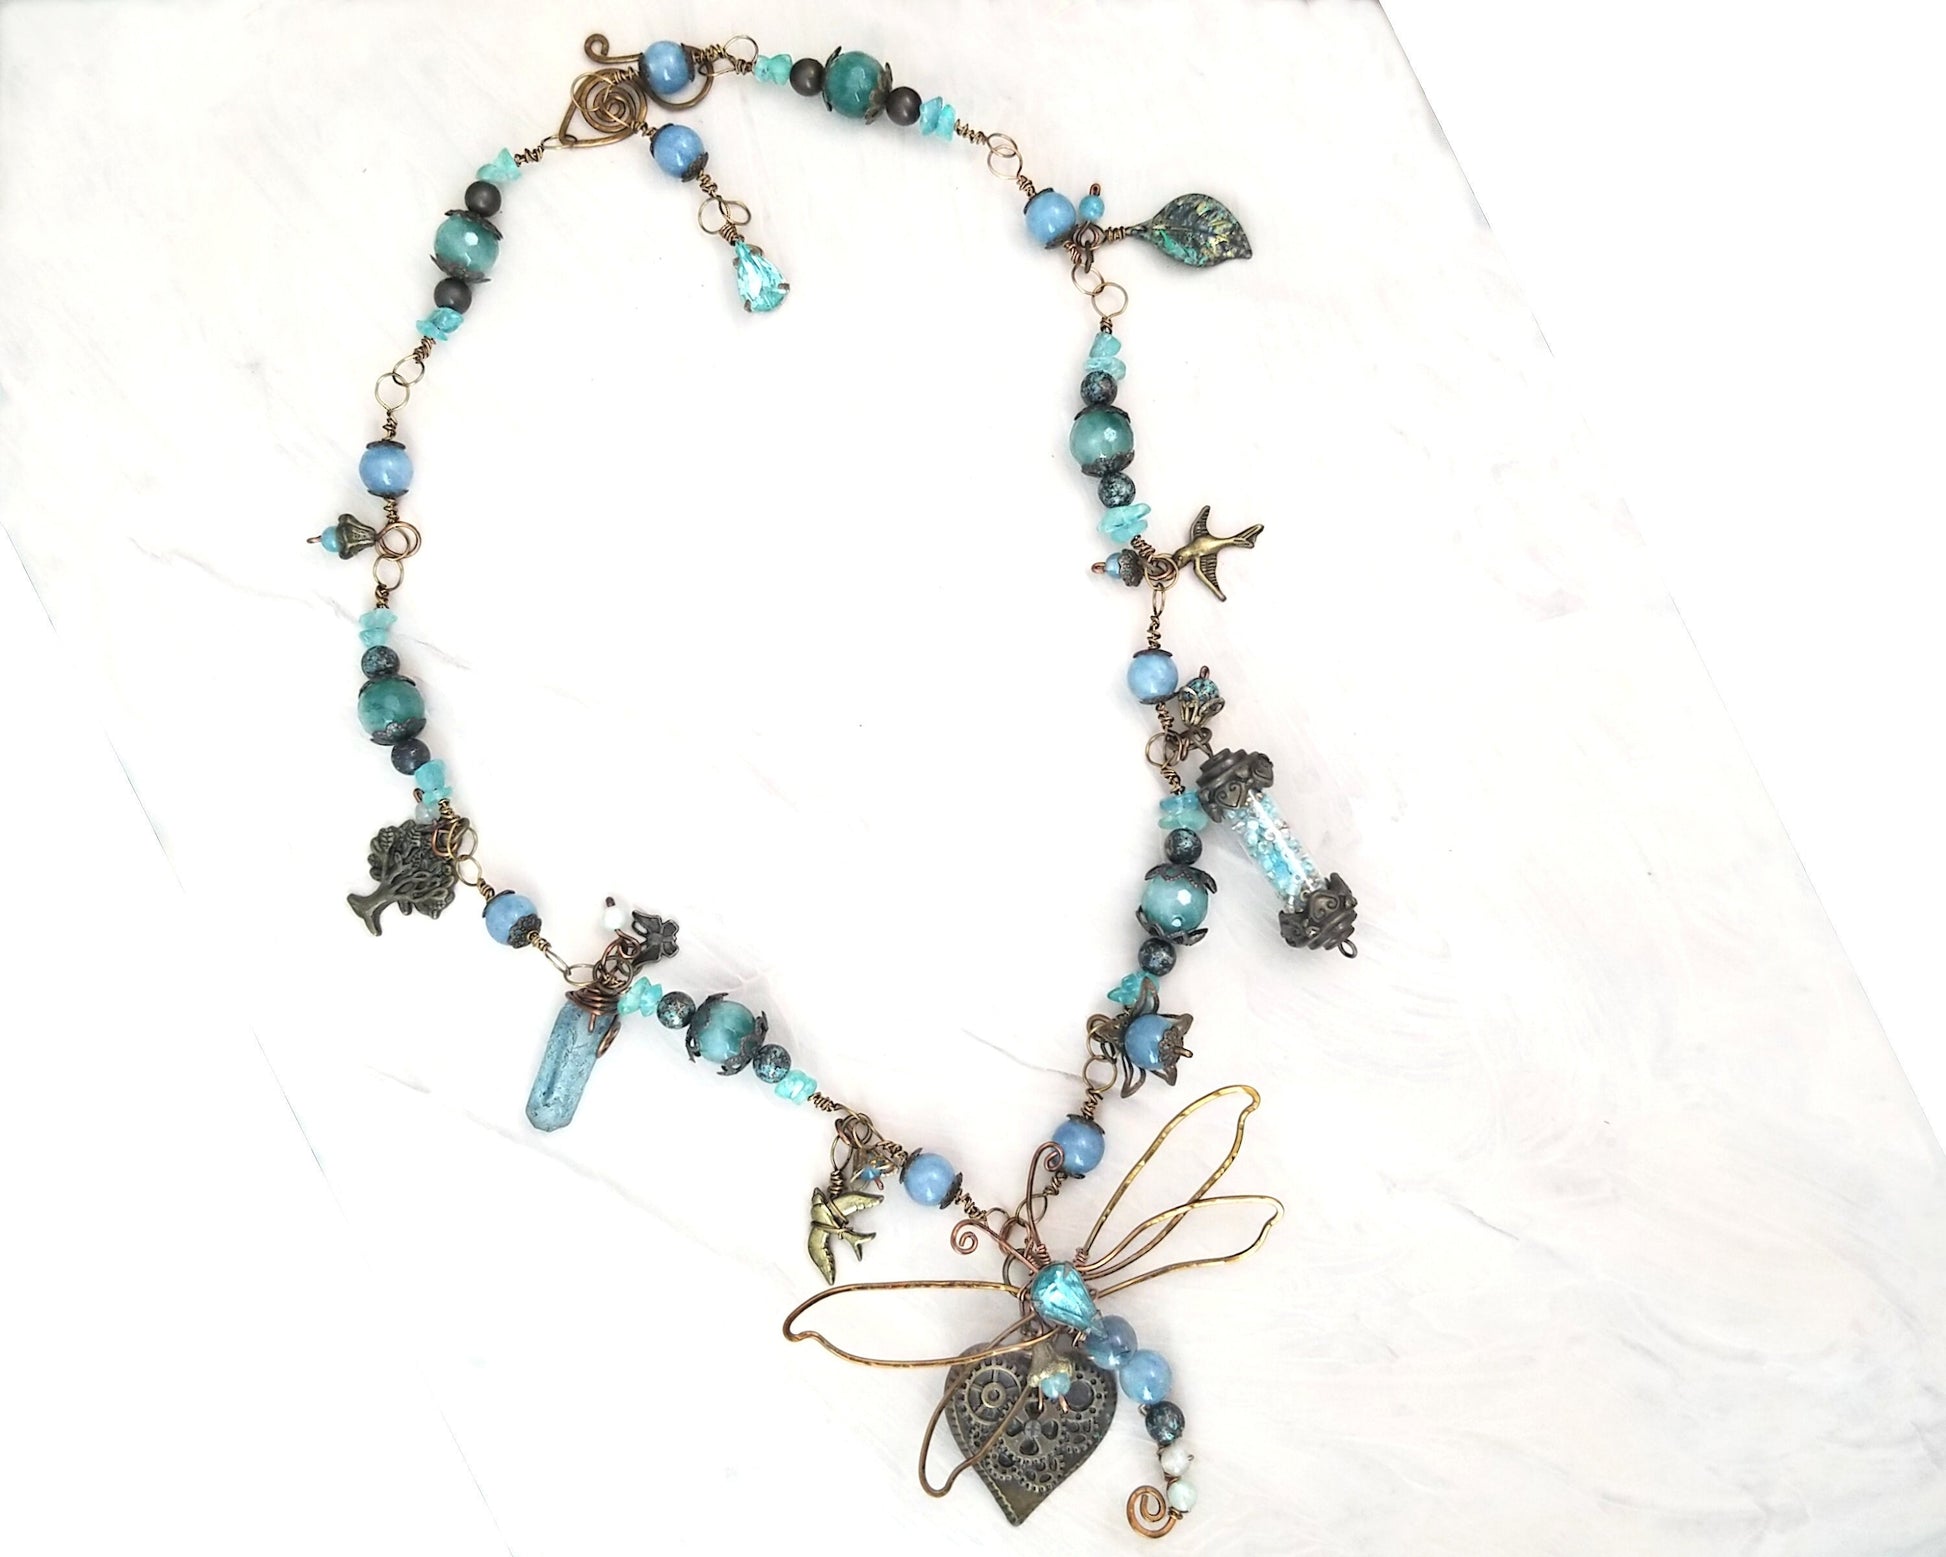 Fairytale Forest Dragonfly Necklace in Teal Renaissance Adjustable Length Fantasy Woodland #1346